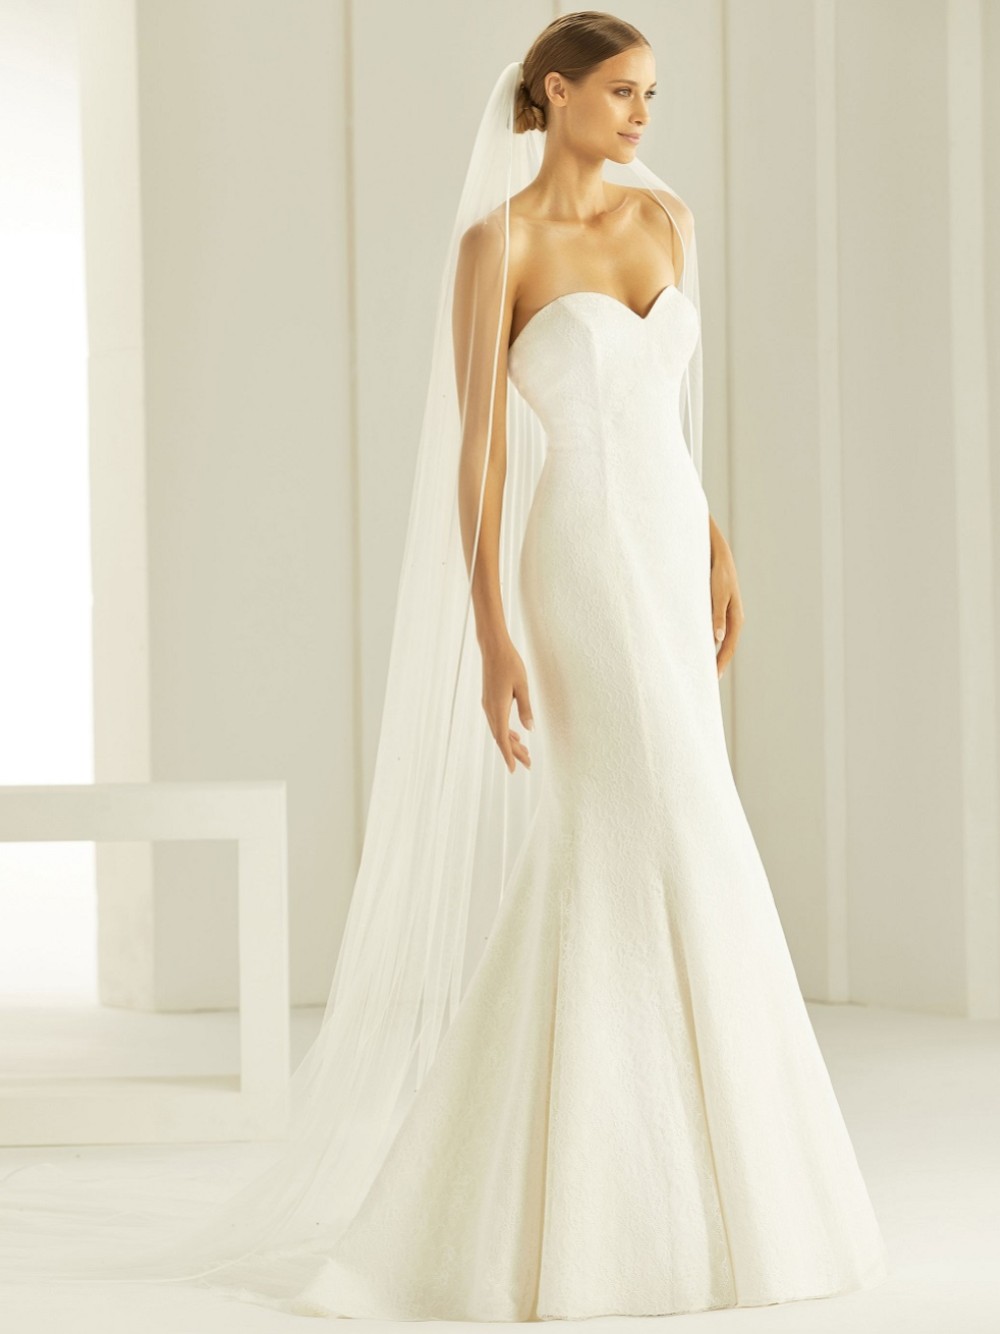 Bianco Ivory Single Tier Satin Edge Cathedral Veil with Crystals S296